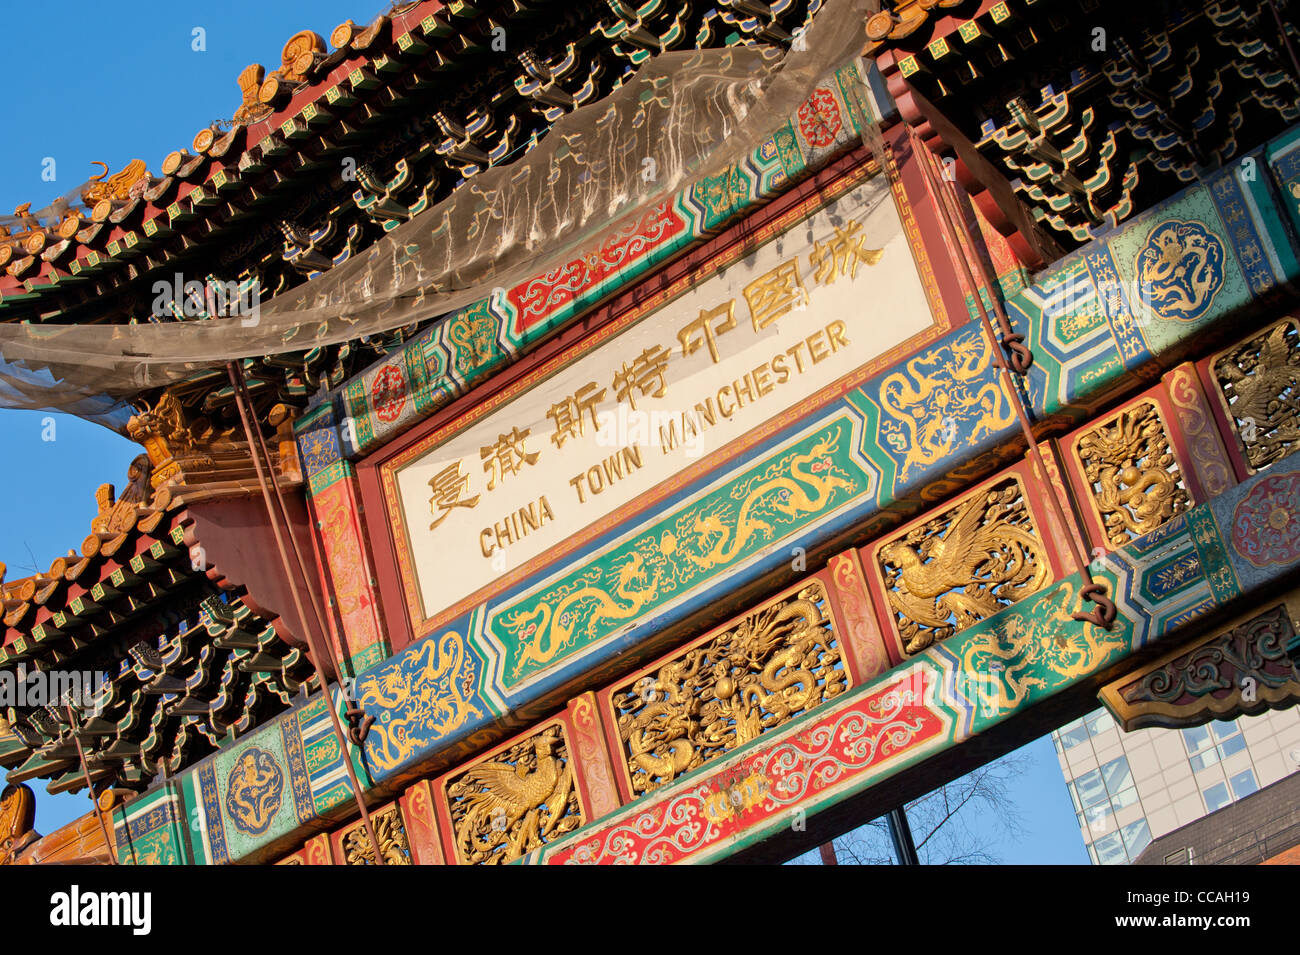 A close up of the Chinatown arch in Manchester, UK. Stock Photo